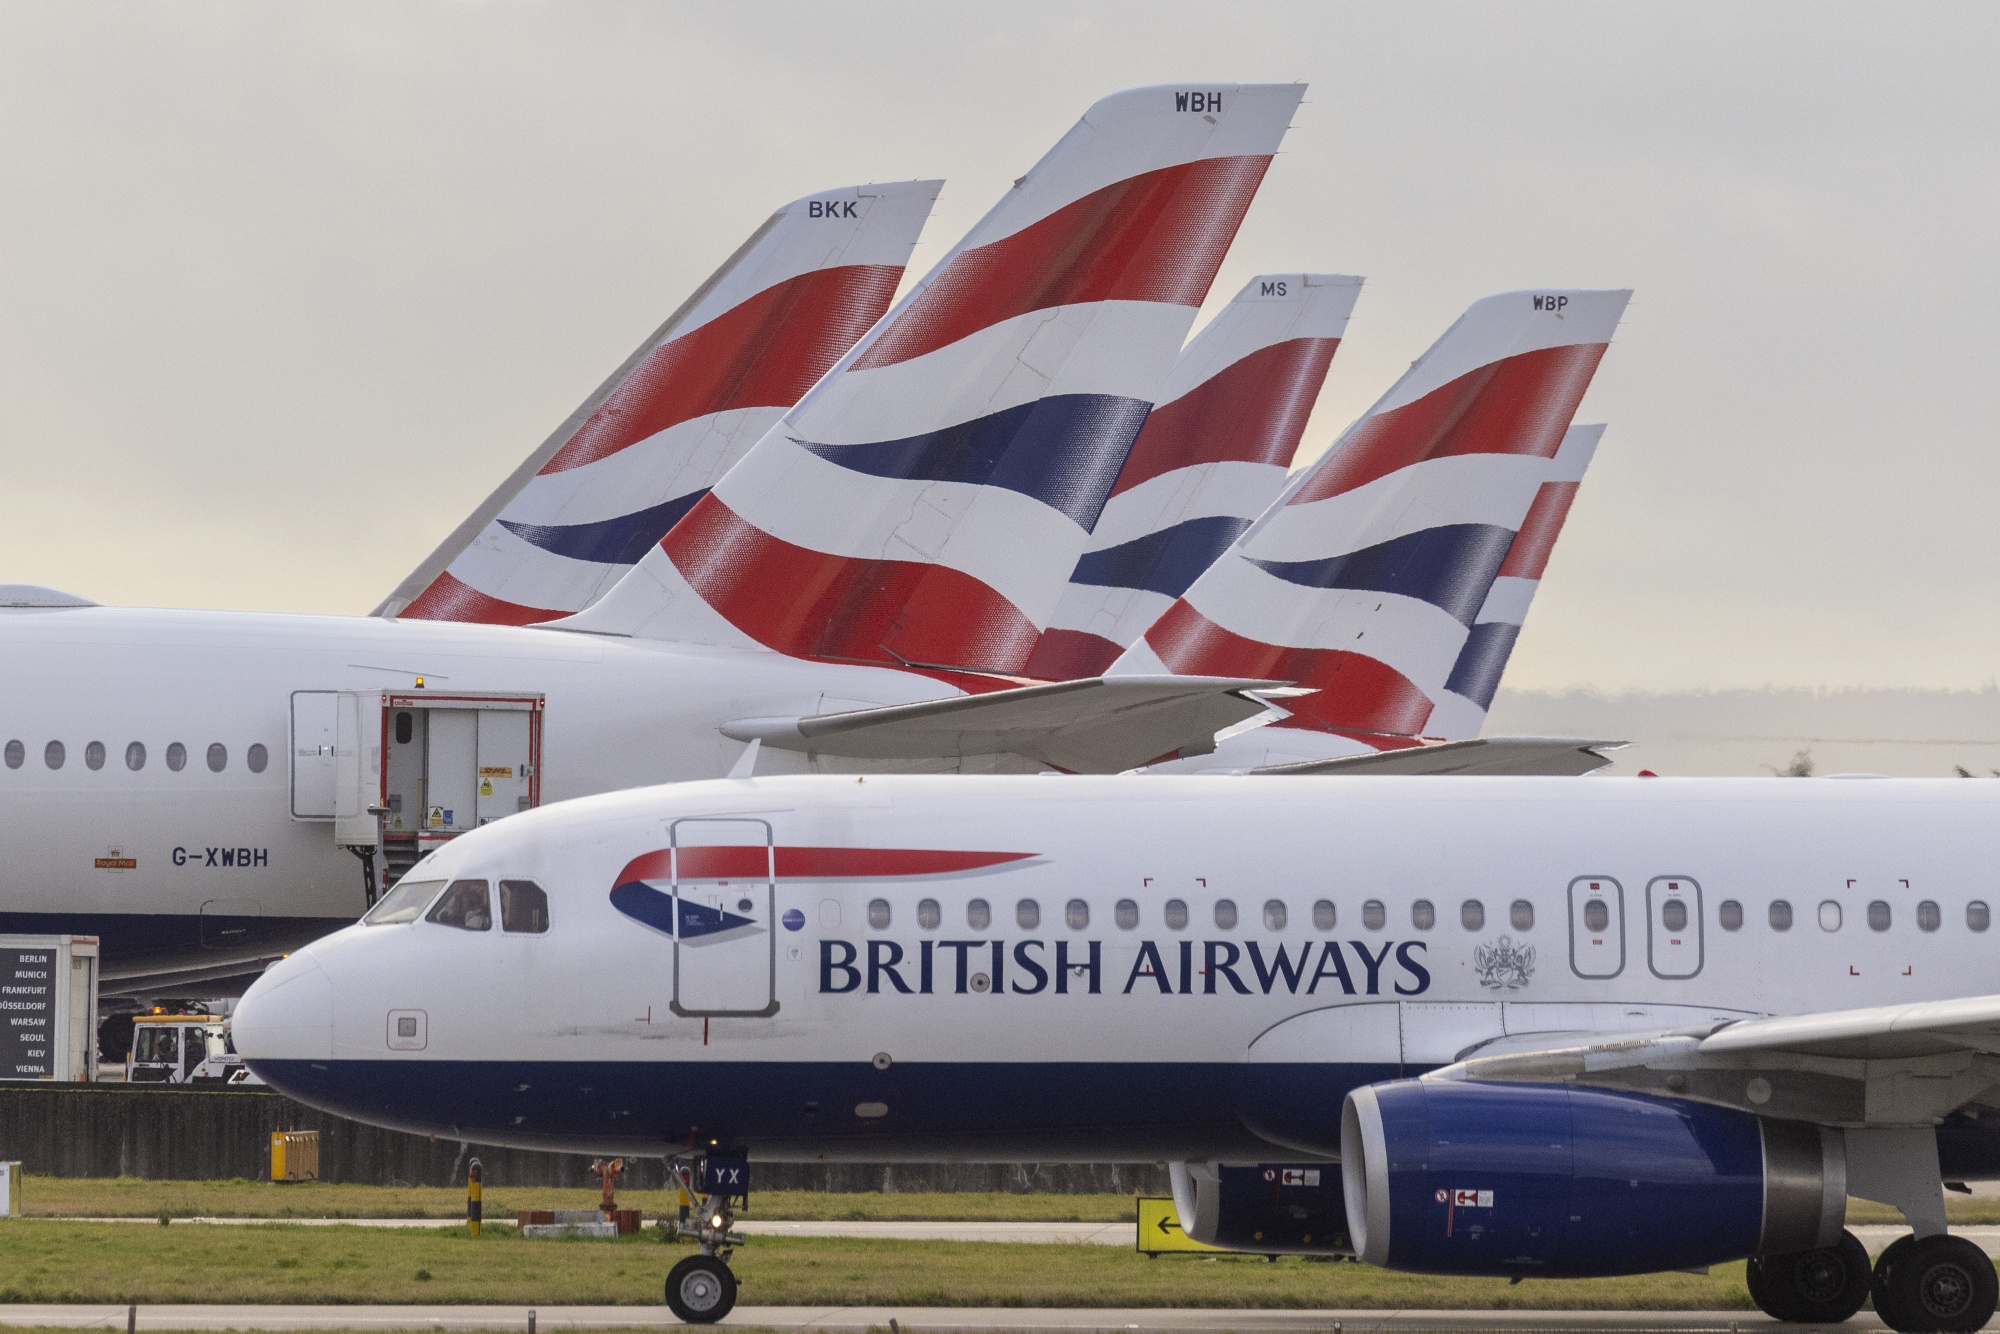 Passenger aircraft, operated by British Airways Plc, at Heathrow Airport. IAG SA, the airline’s parent company, has pledged to up its sustainable aviation fuel usage to 10% by 2030.